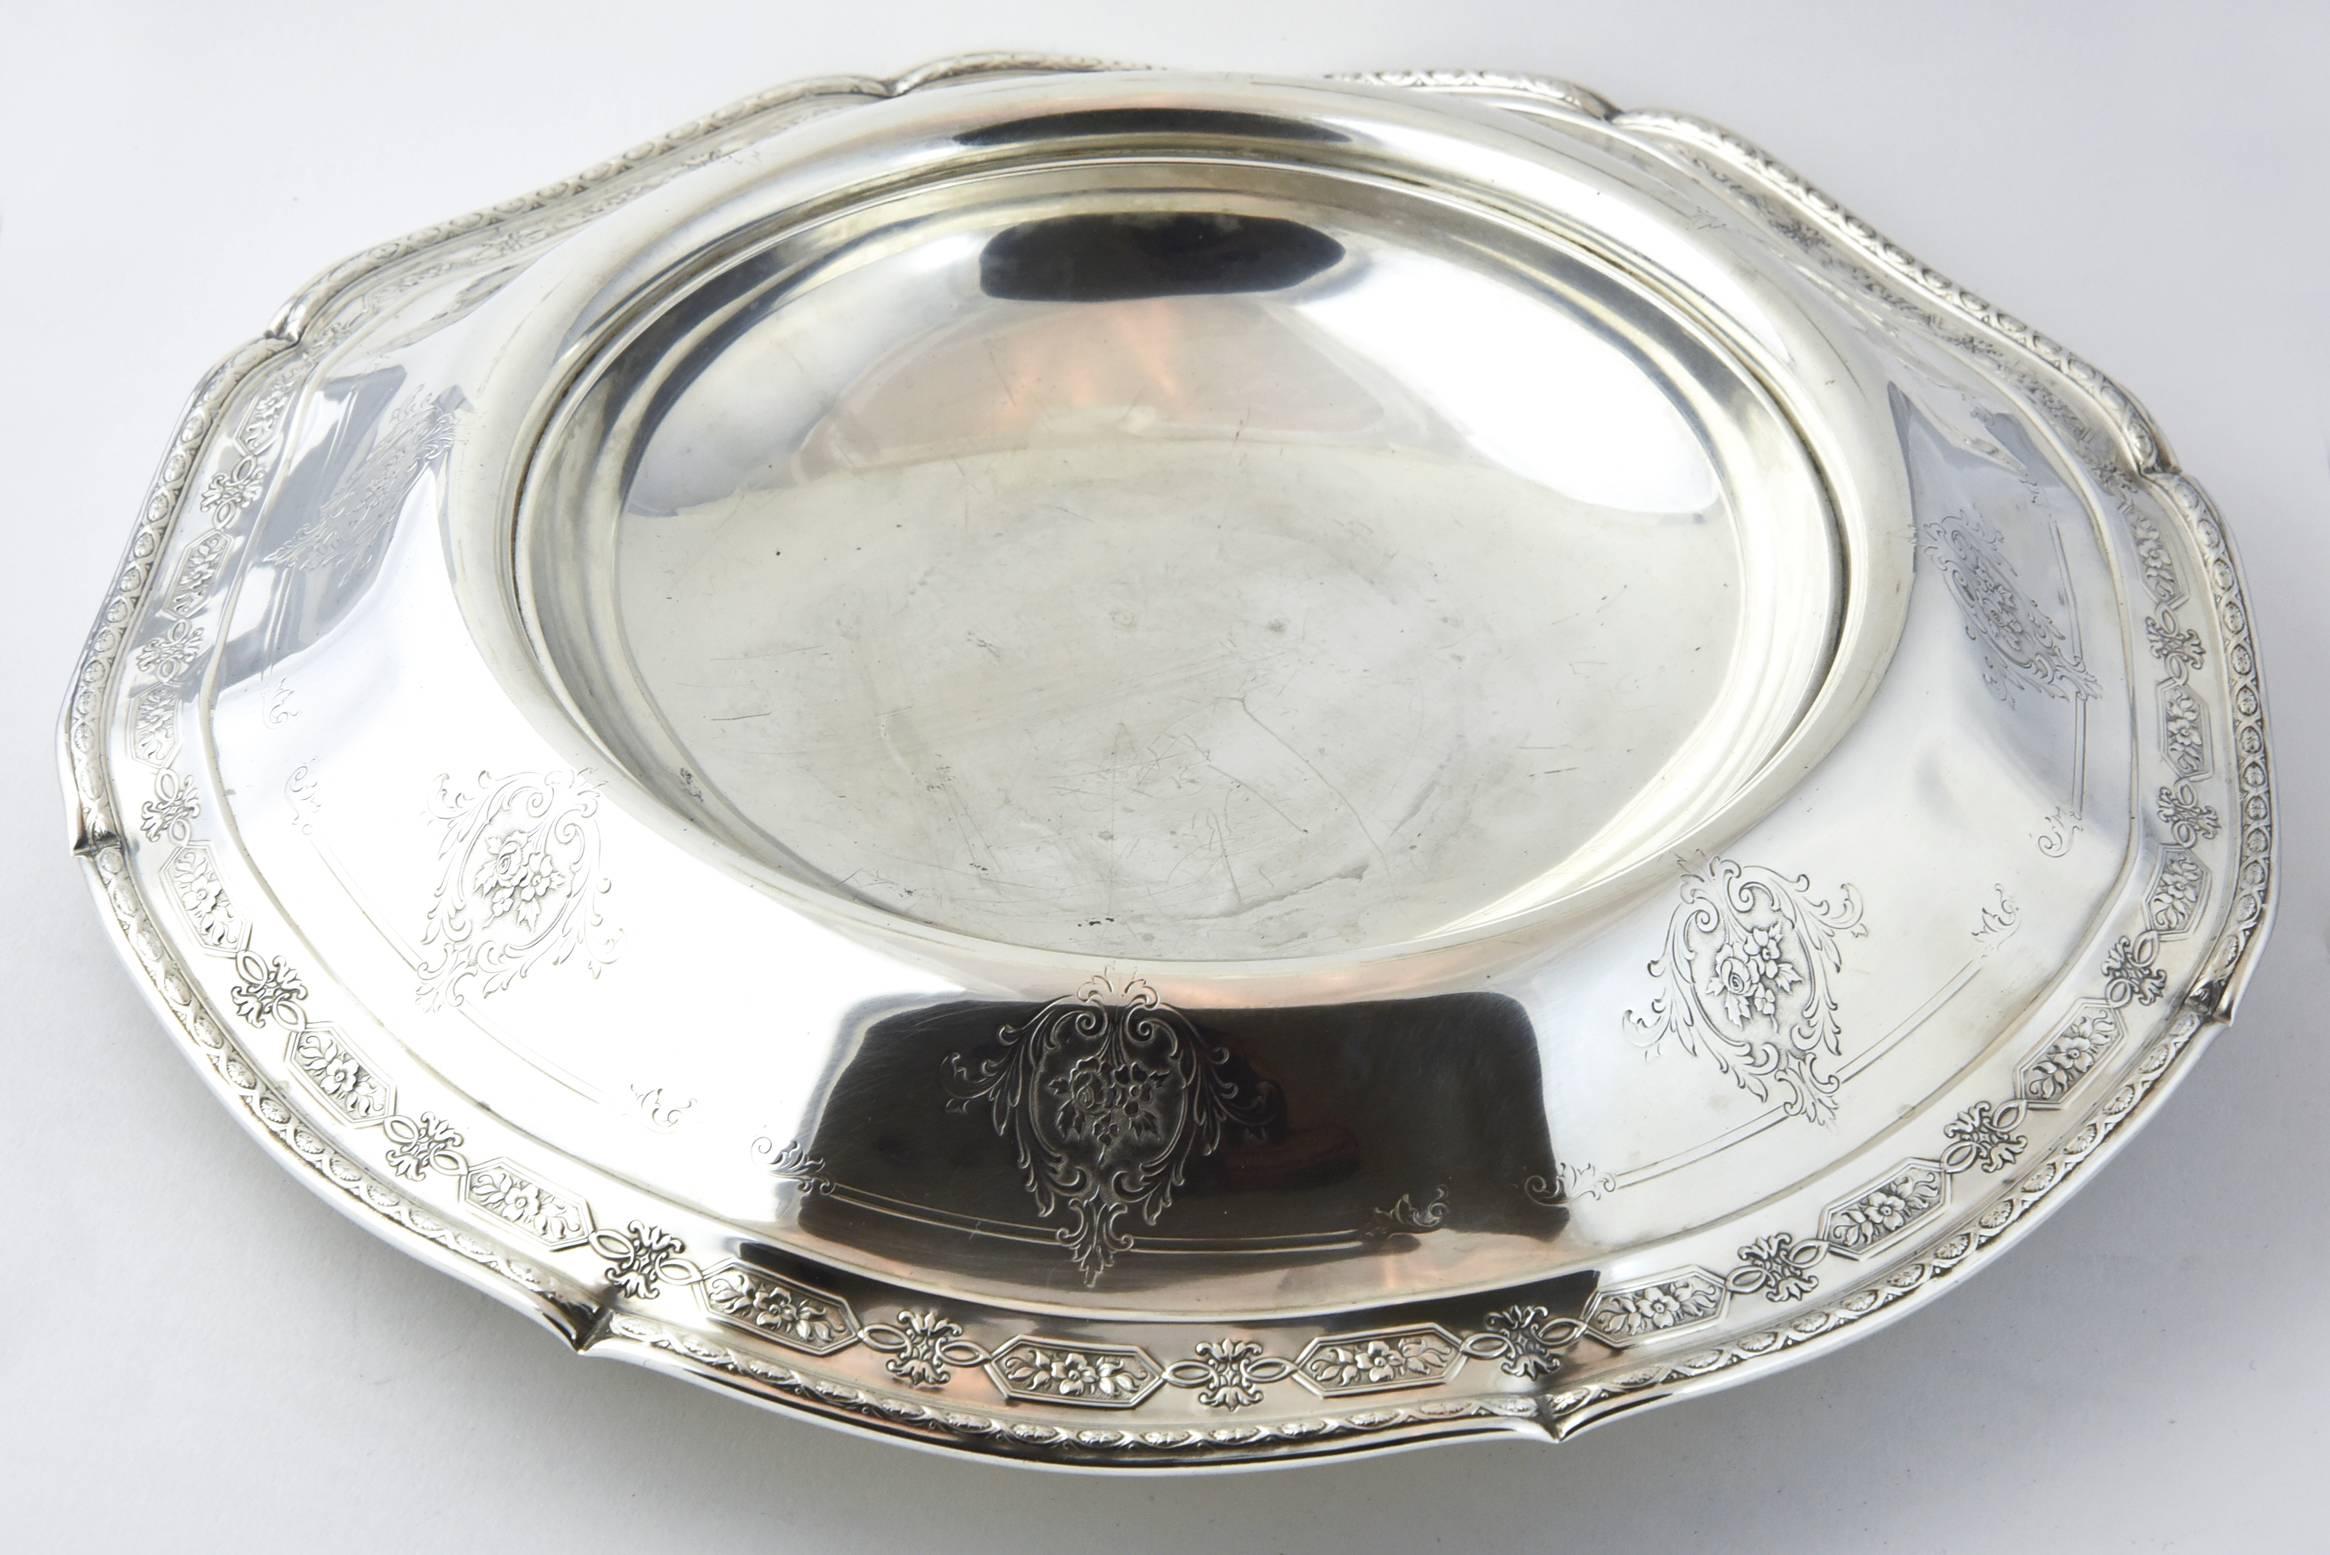 American Towle Louis XIV Ornate Sterling Silver Flower Display Bowl with Pierced Frog